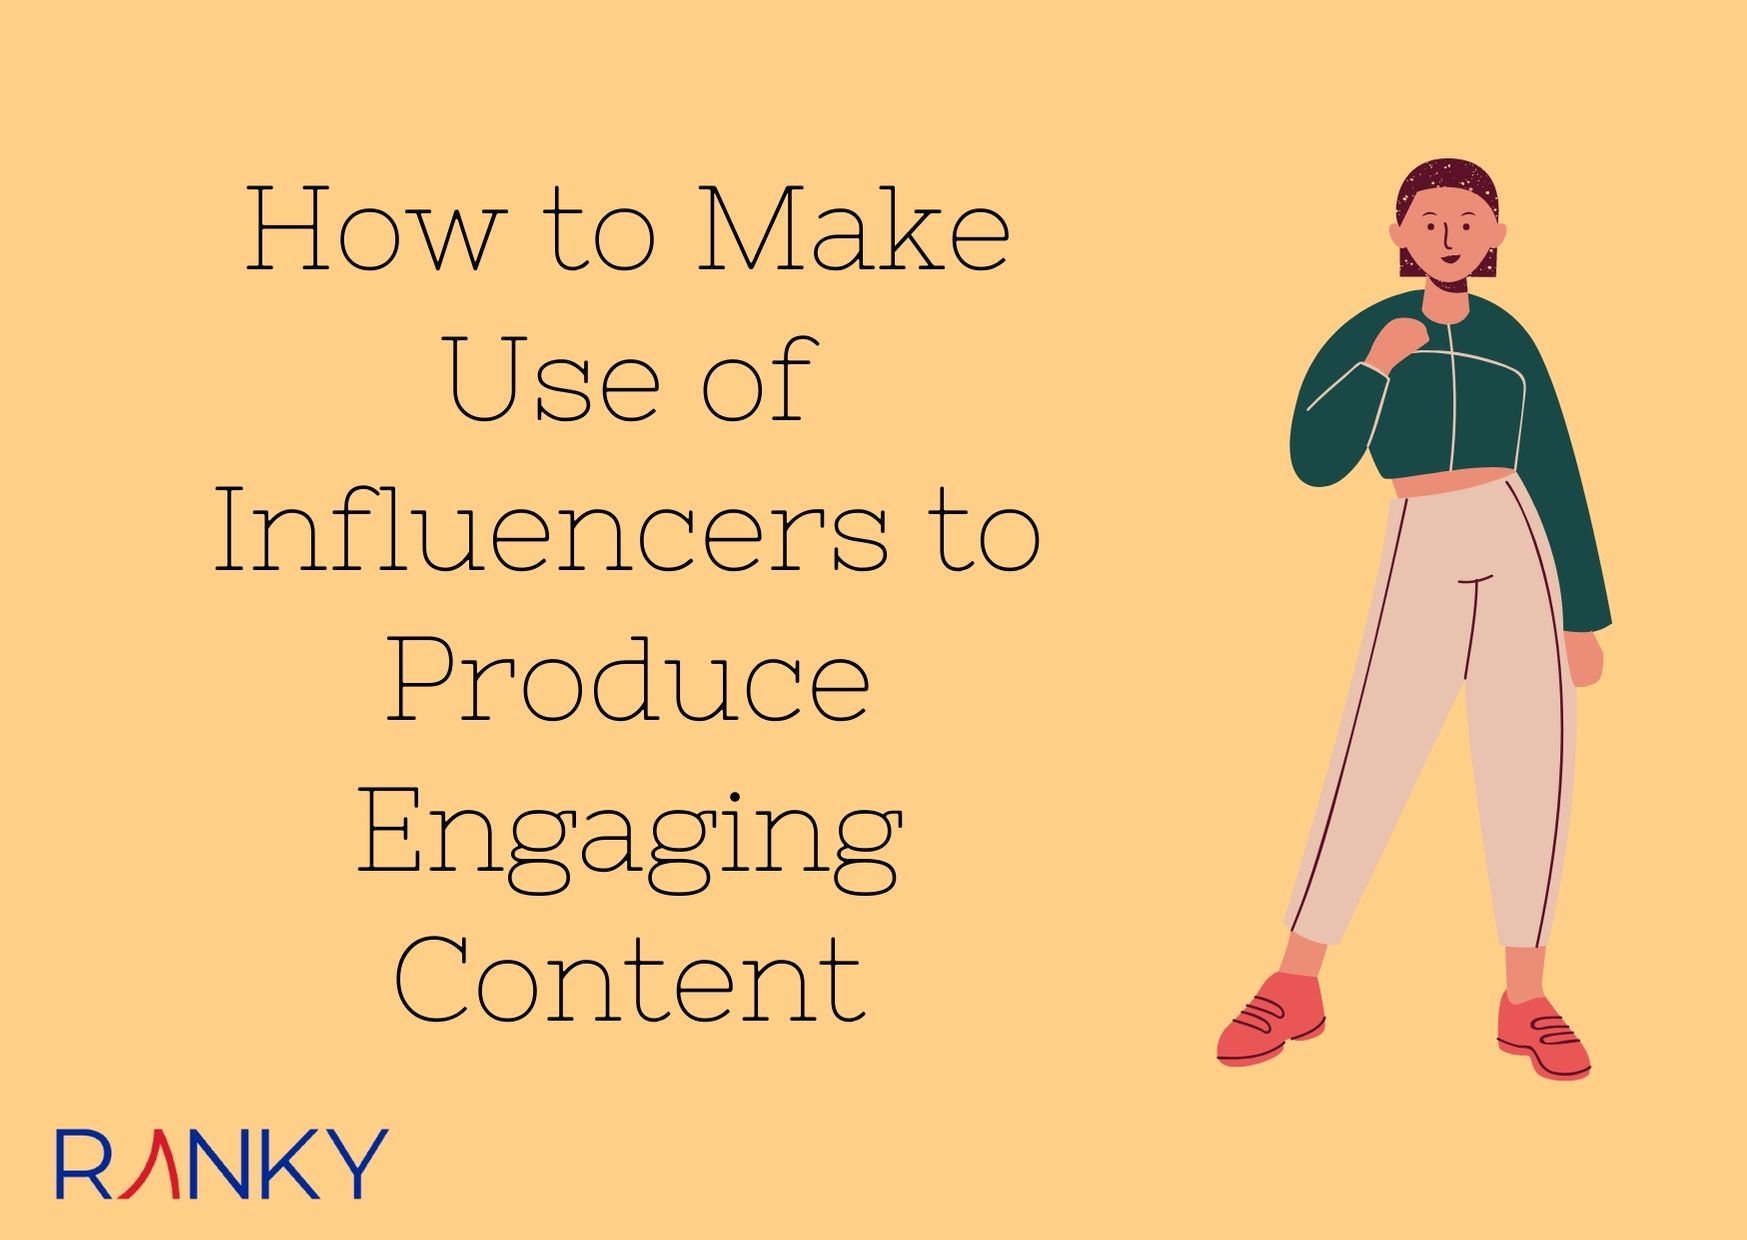 How to Make Use of Influencers to Produce Engaging Content